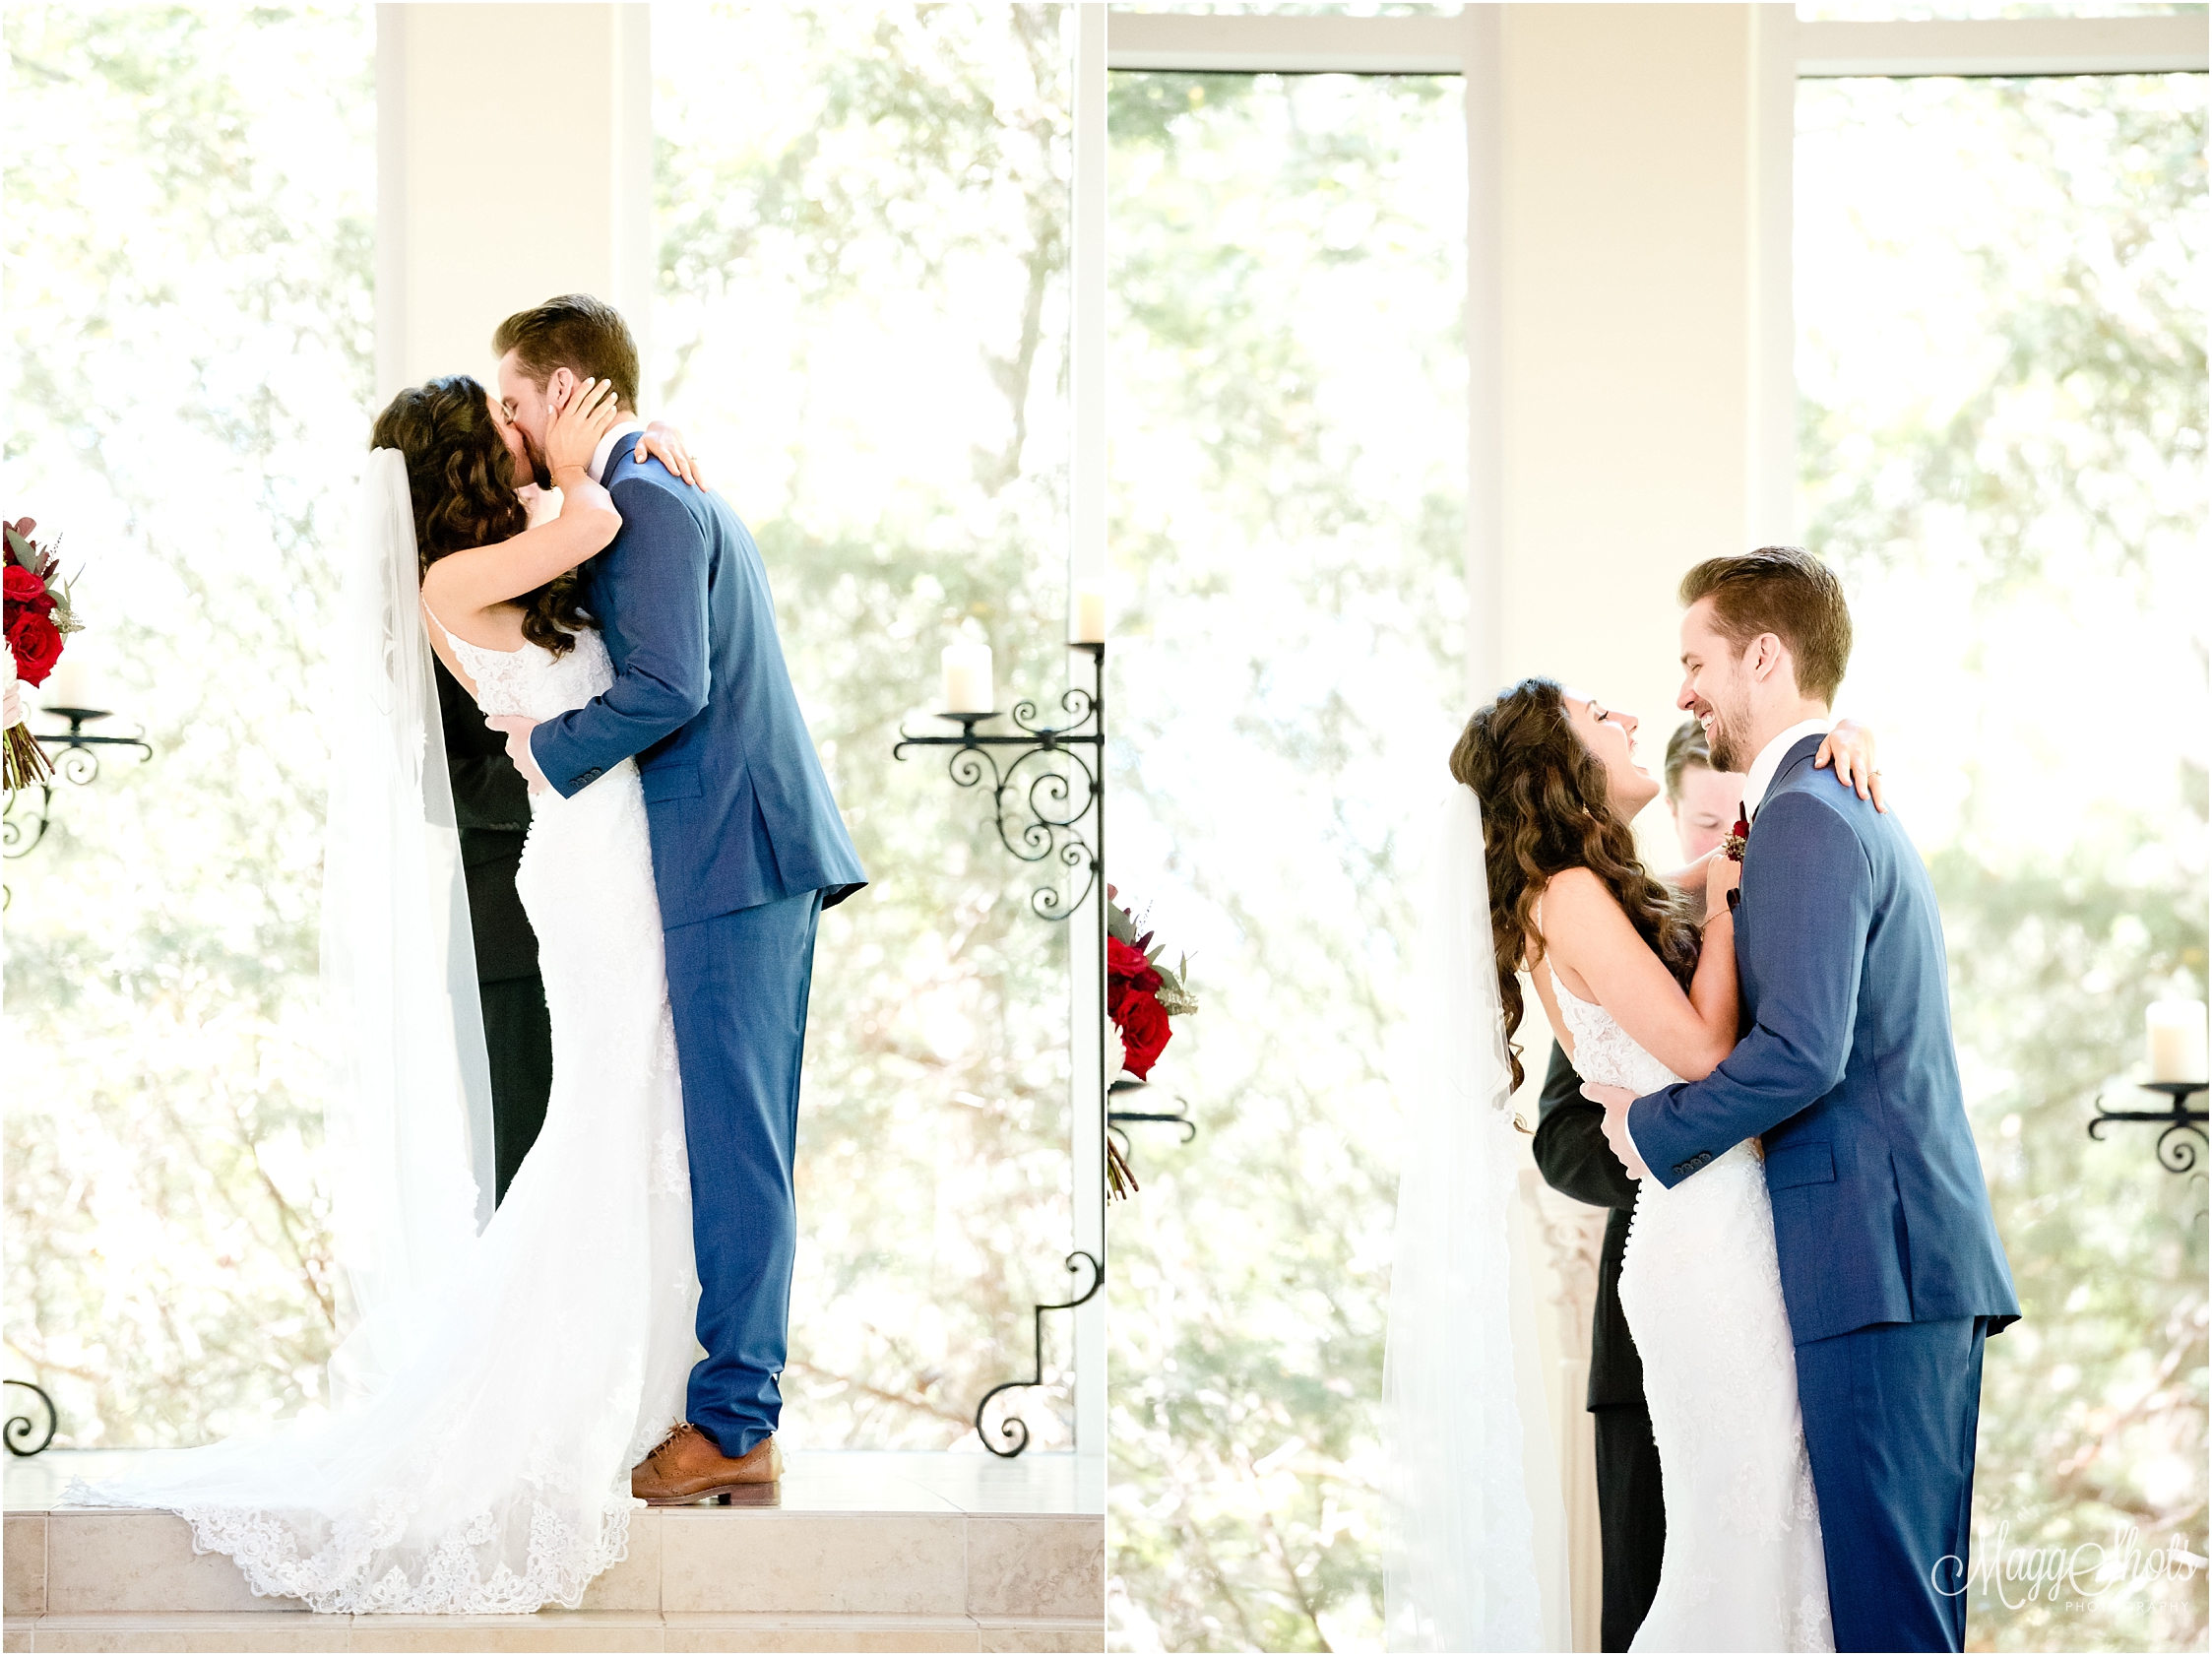 First Kiss, Bride and Groom, Love, Husband and Wife, Dance, Wedding, Professional Photographer, Professional Photography, Beautiful, DFW Wedding Photographer, MaggShots Photography, MaggShots